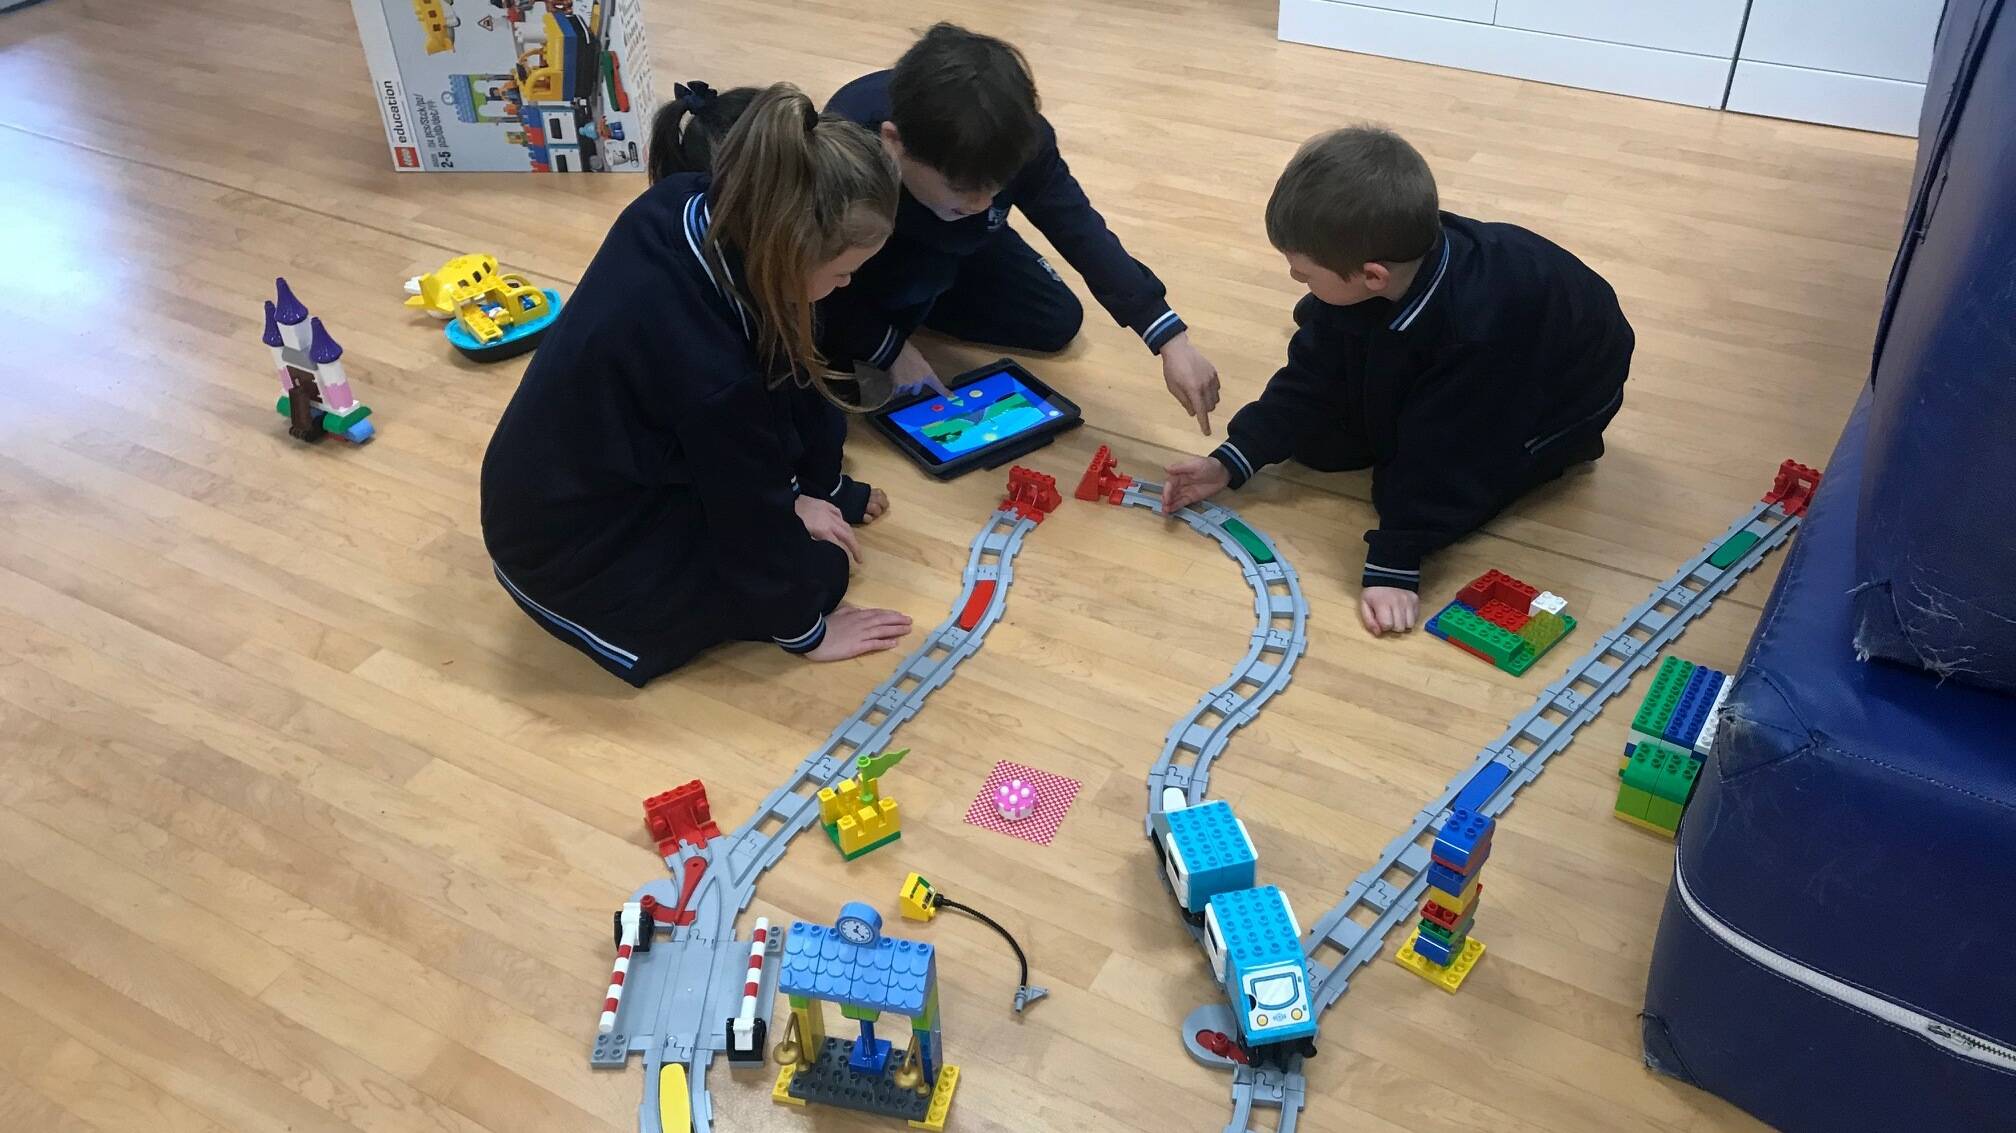 Our visit to St Josephs School to see the junior primary students using the Bee Bots and Lego STEM sets purchased with their 2020 Bright Future Grants was amazing to say the least, said Birkenhead terminal manager David Barker.